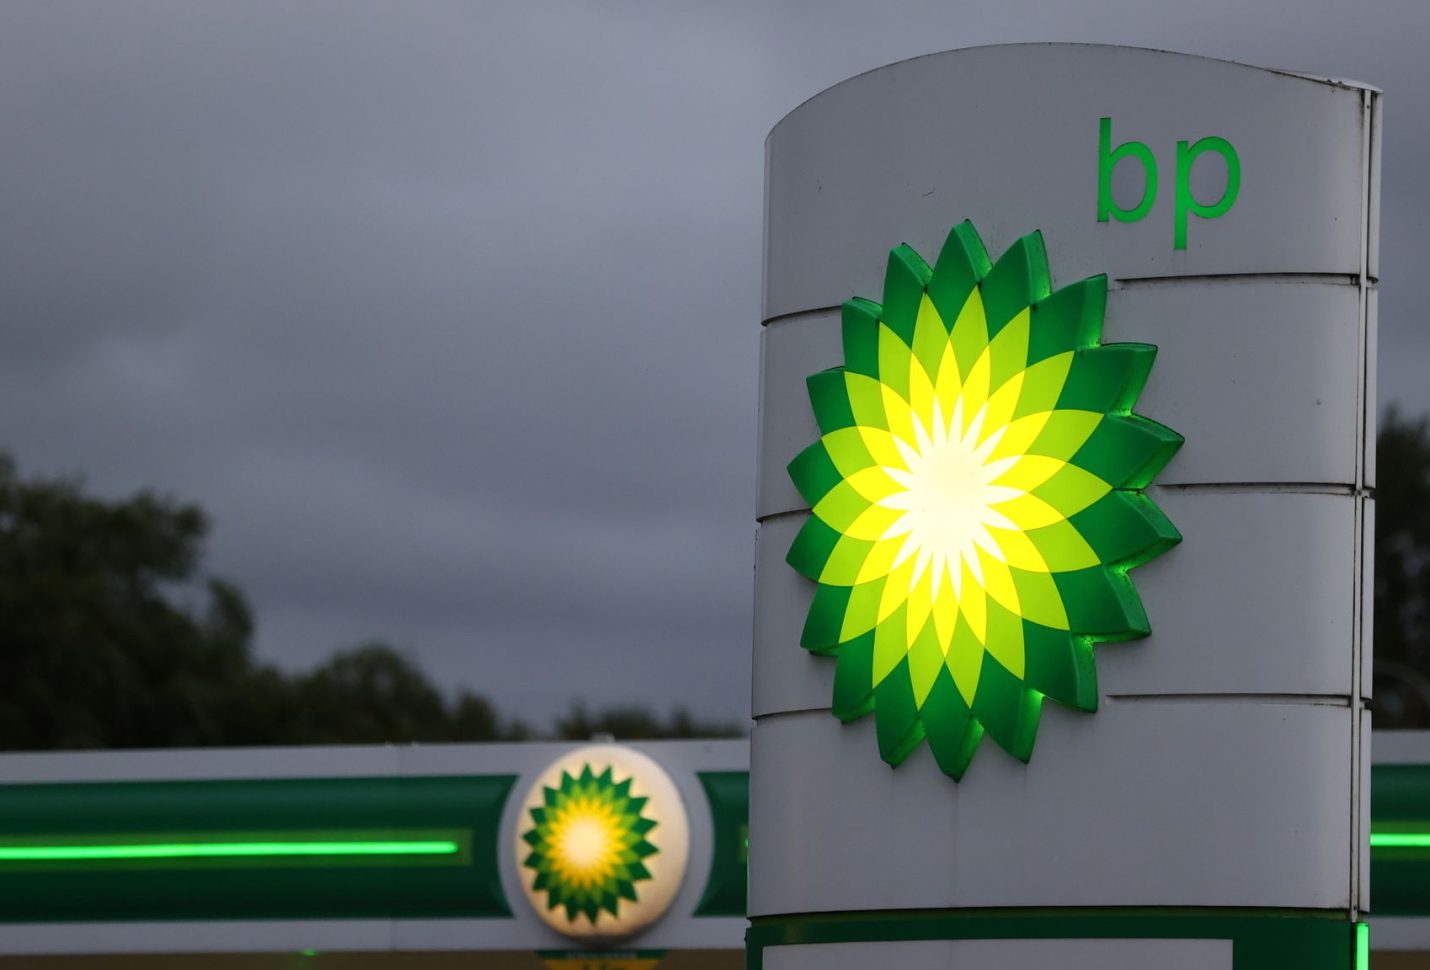 bp invests £4 m in Dynamon to optimize lower emission solutions for fleets